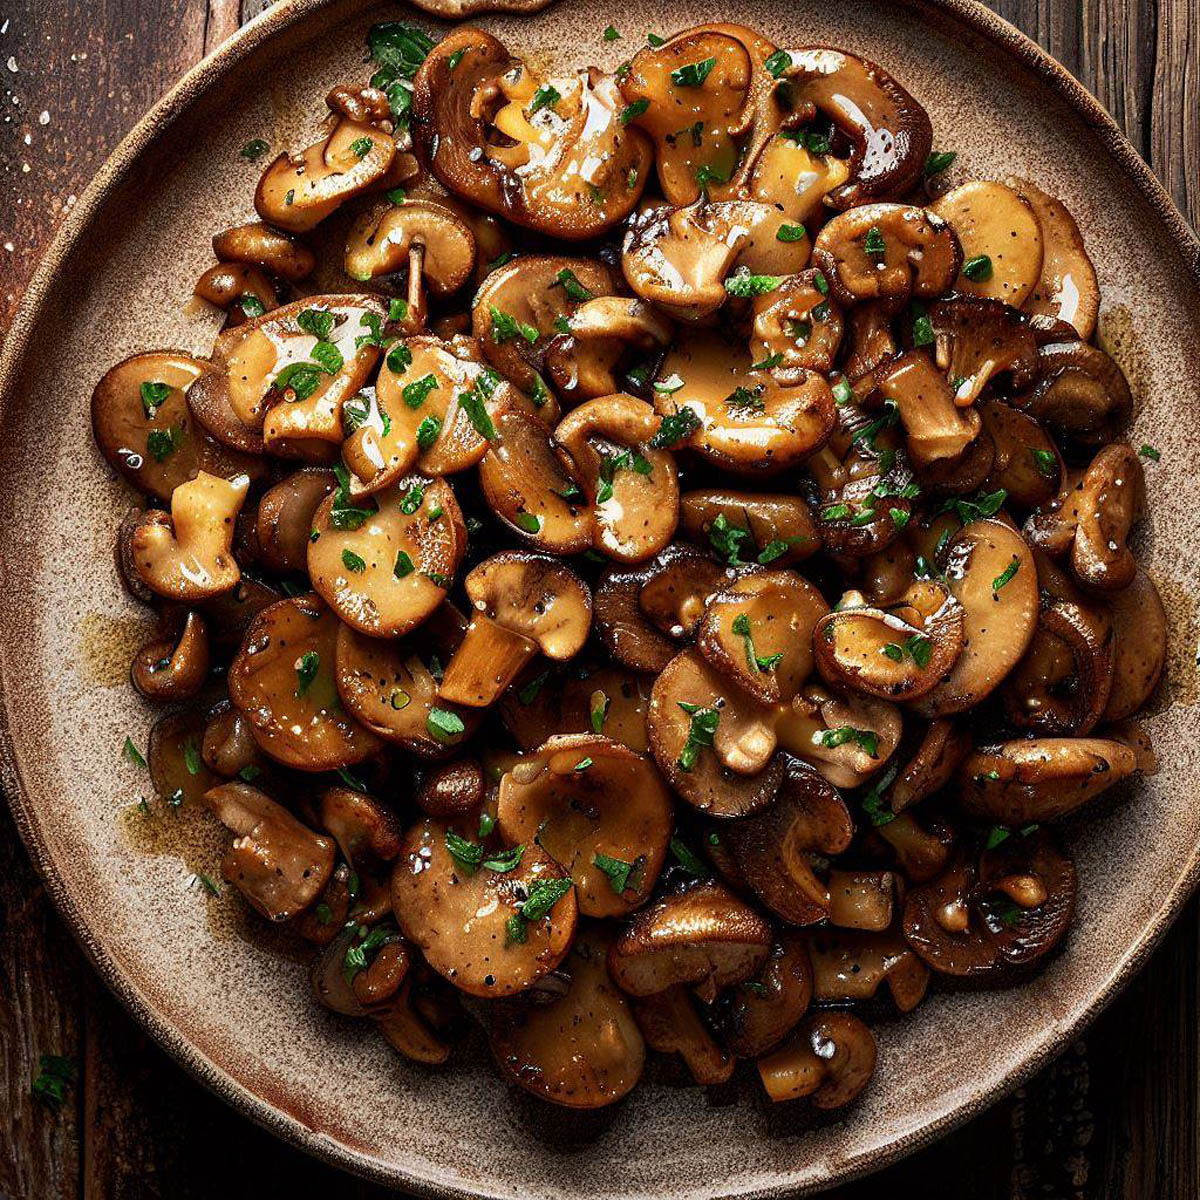 Close-up view of sautéed mushrooms with fresh parsley garnish in a rustic serving dish.